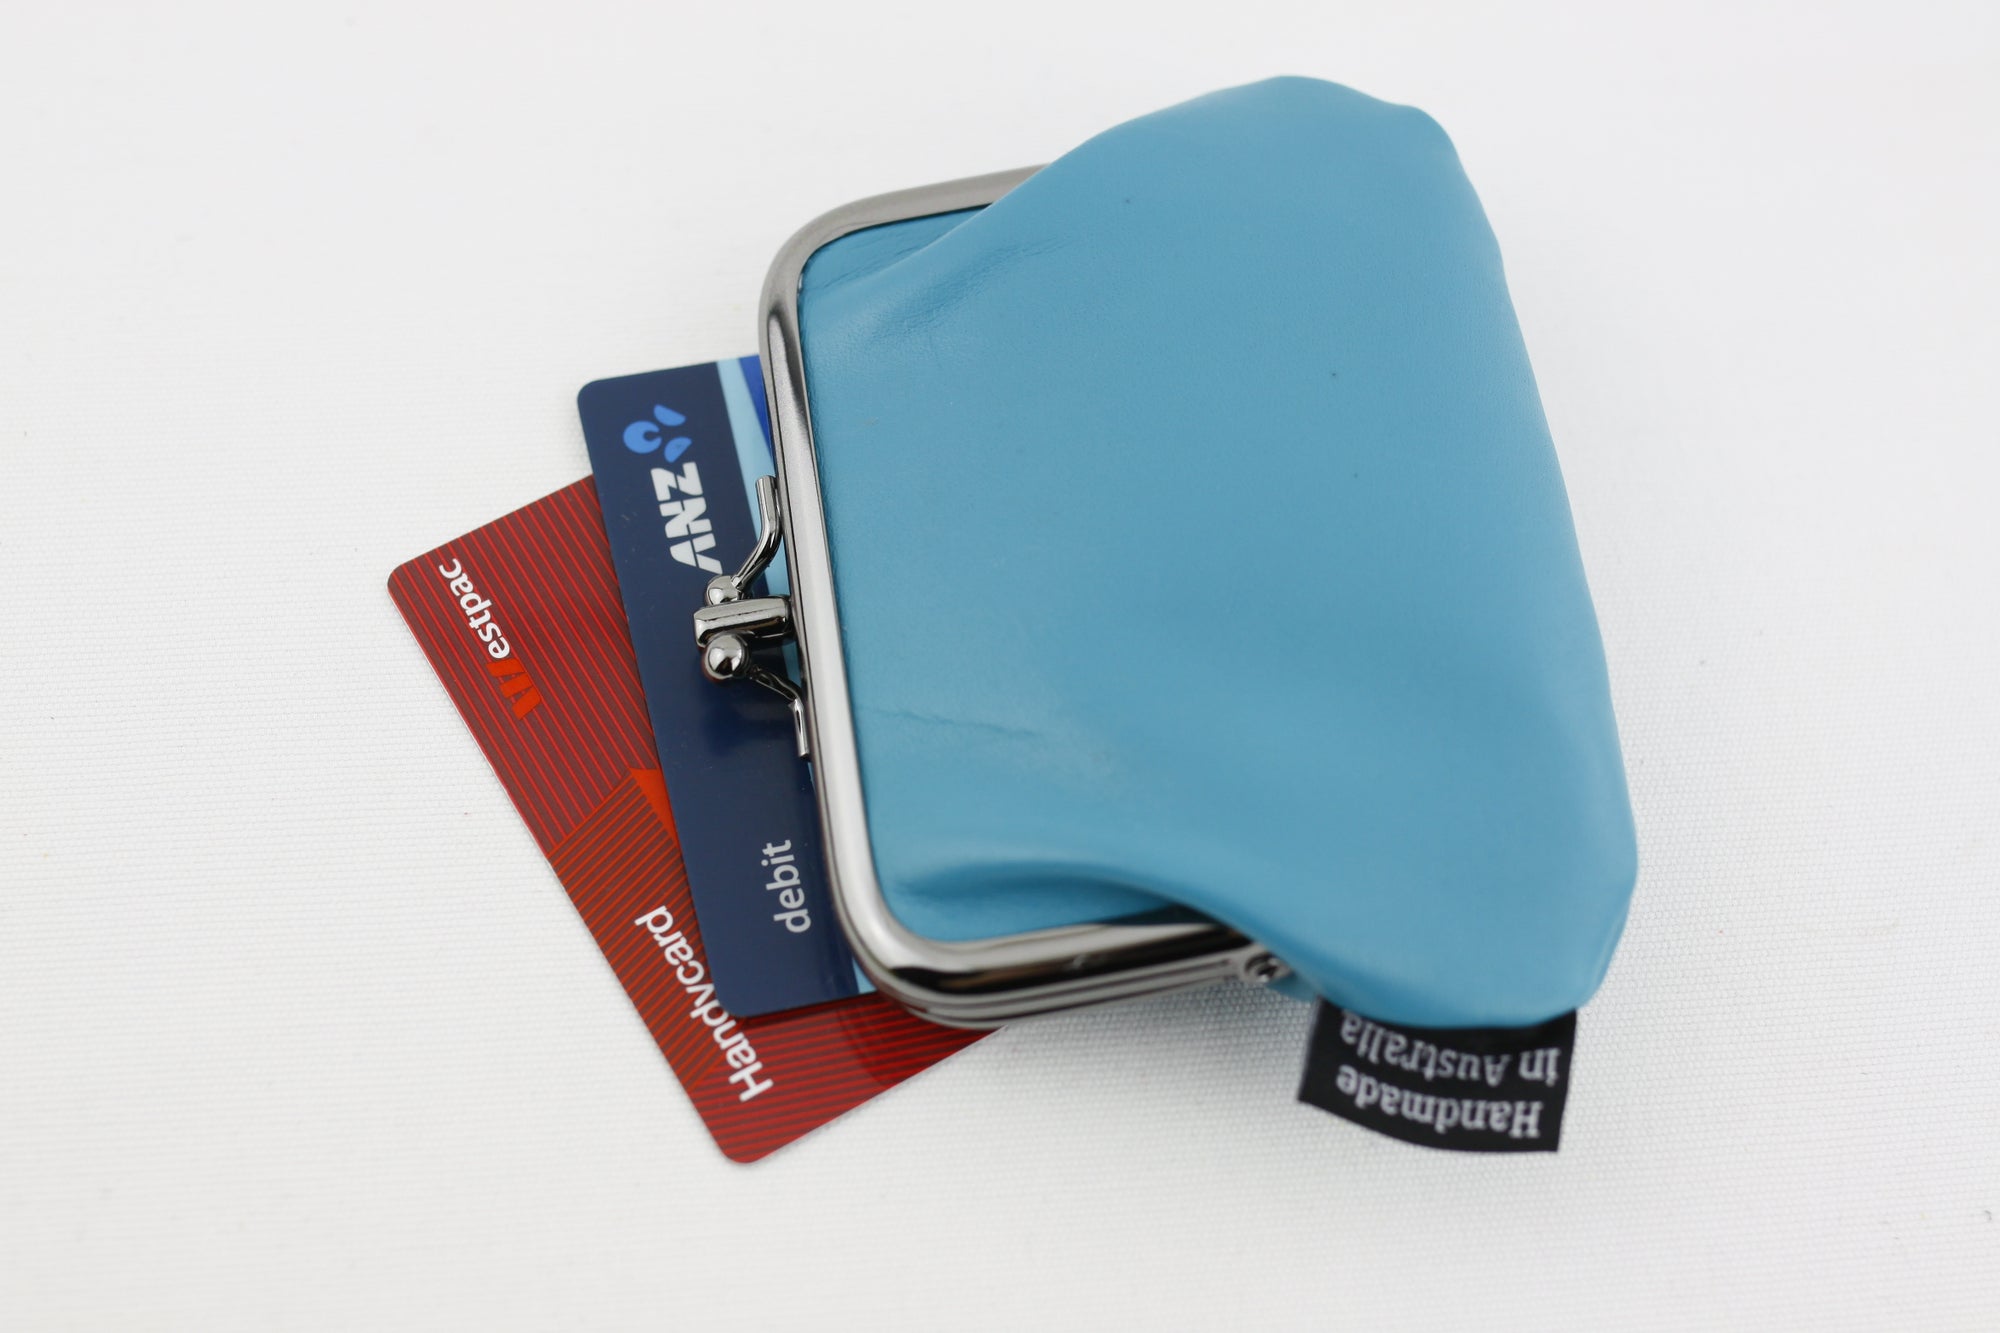 Teal Leather Coin Purse Handmade in Australia | PINKOASIS